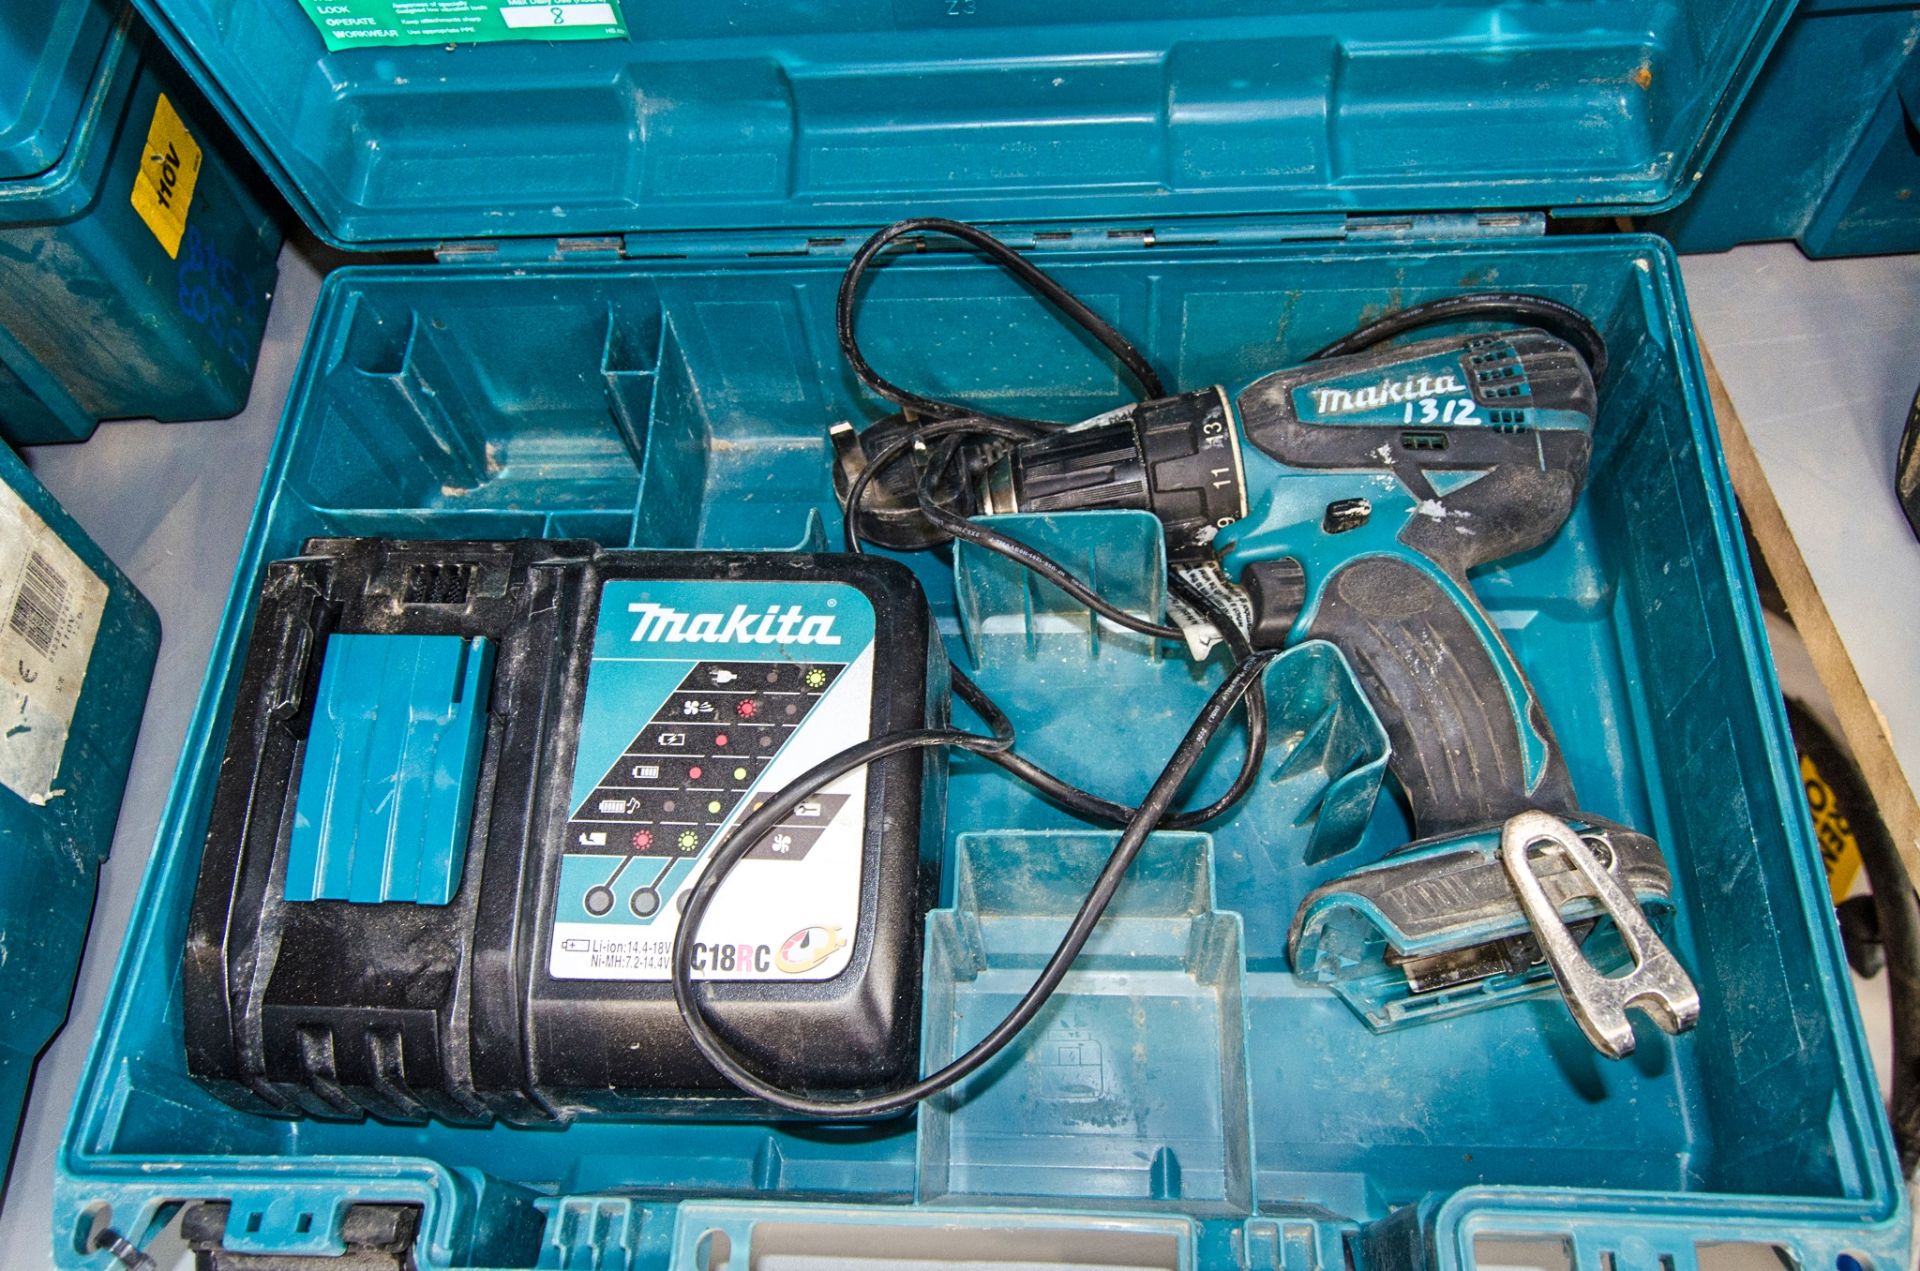 Makita DDF446 18v cordless power drill c/w charger and carry case ** No battery ** 03111873